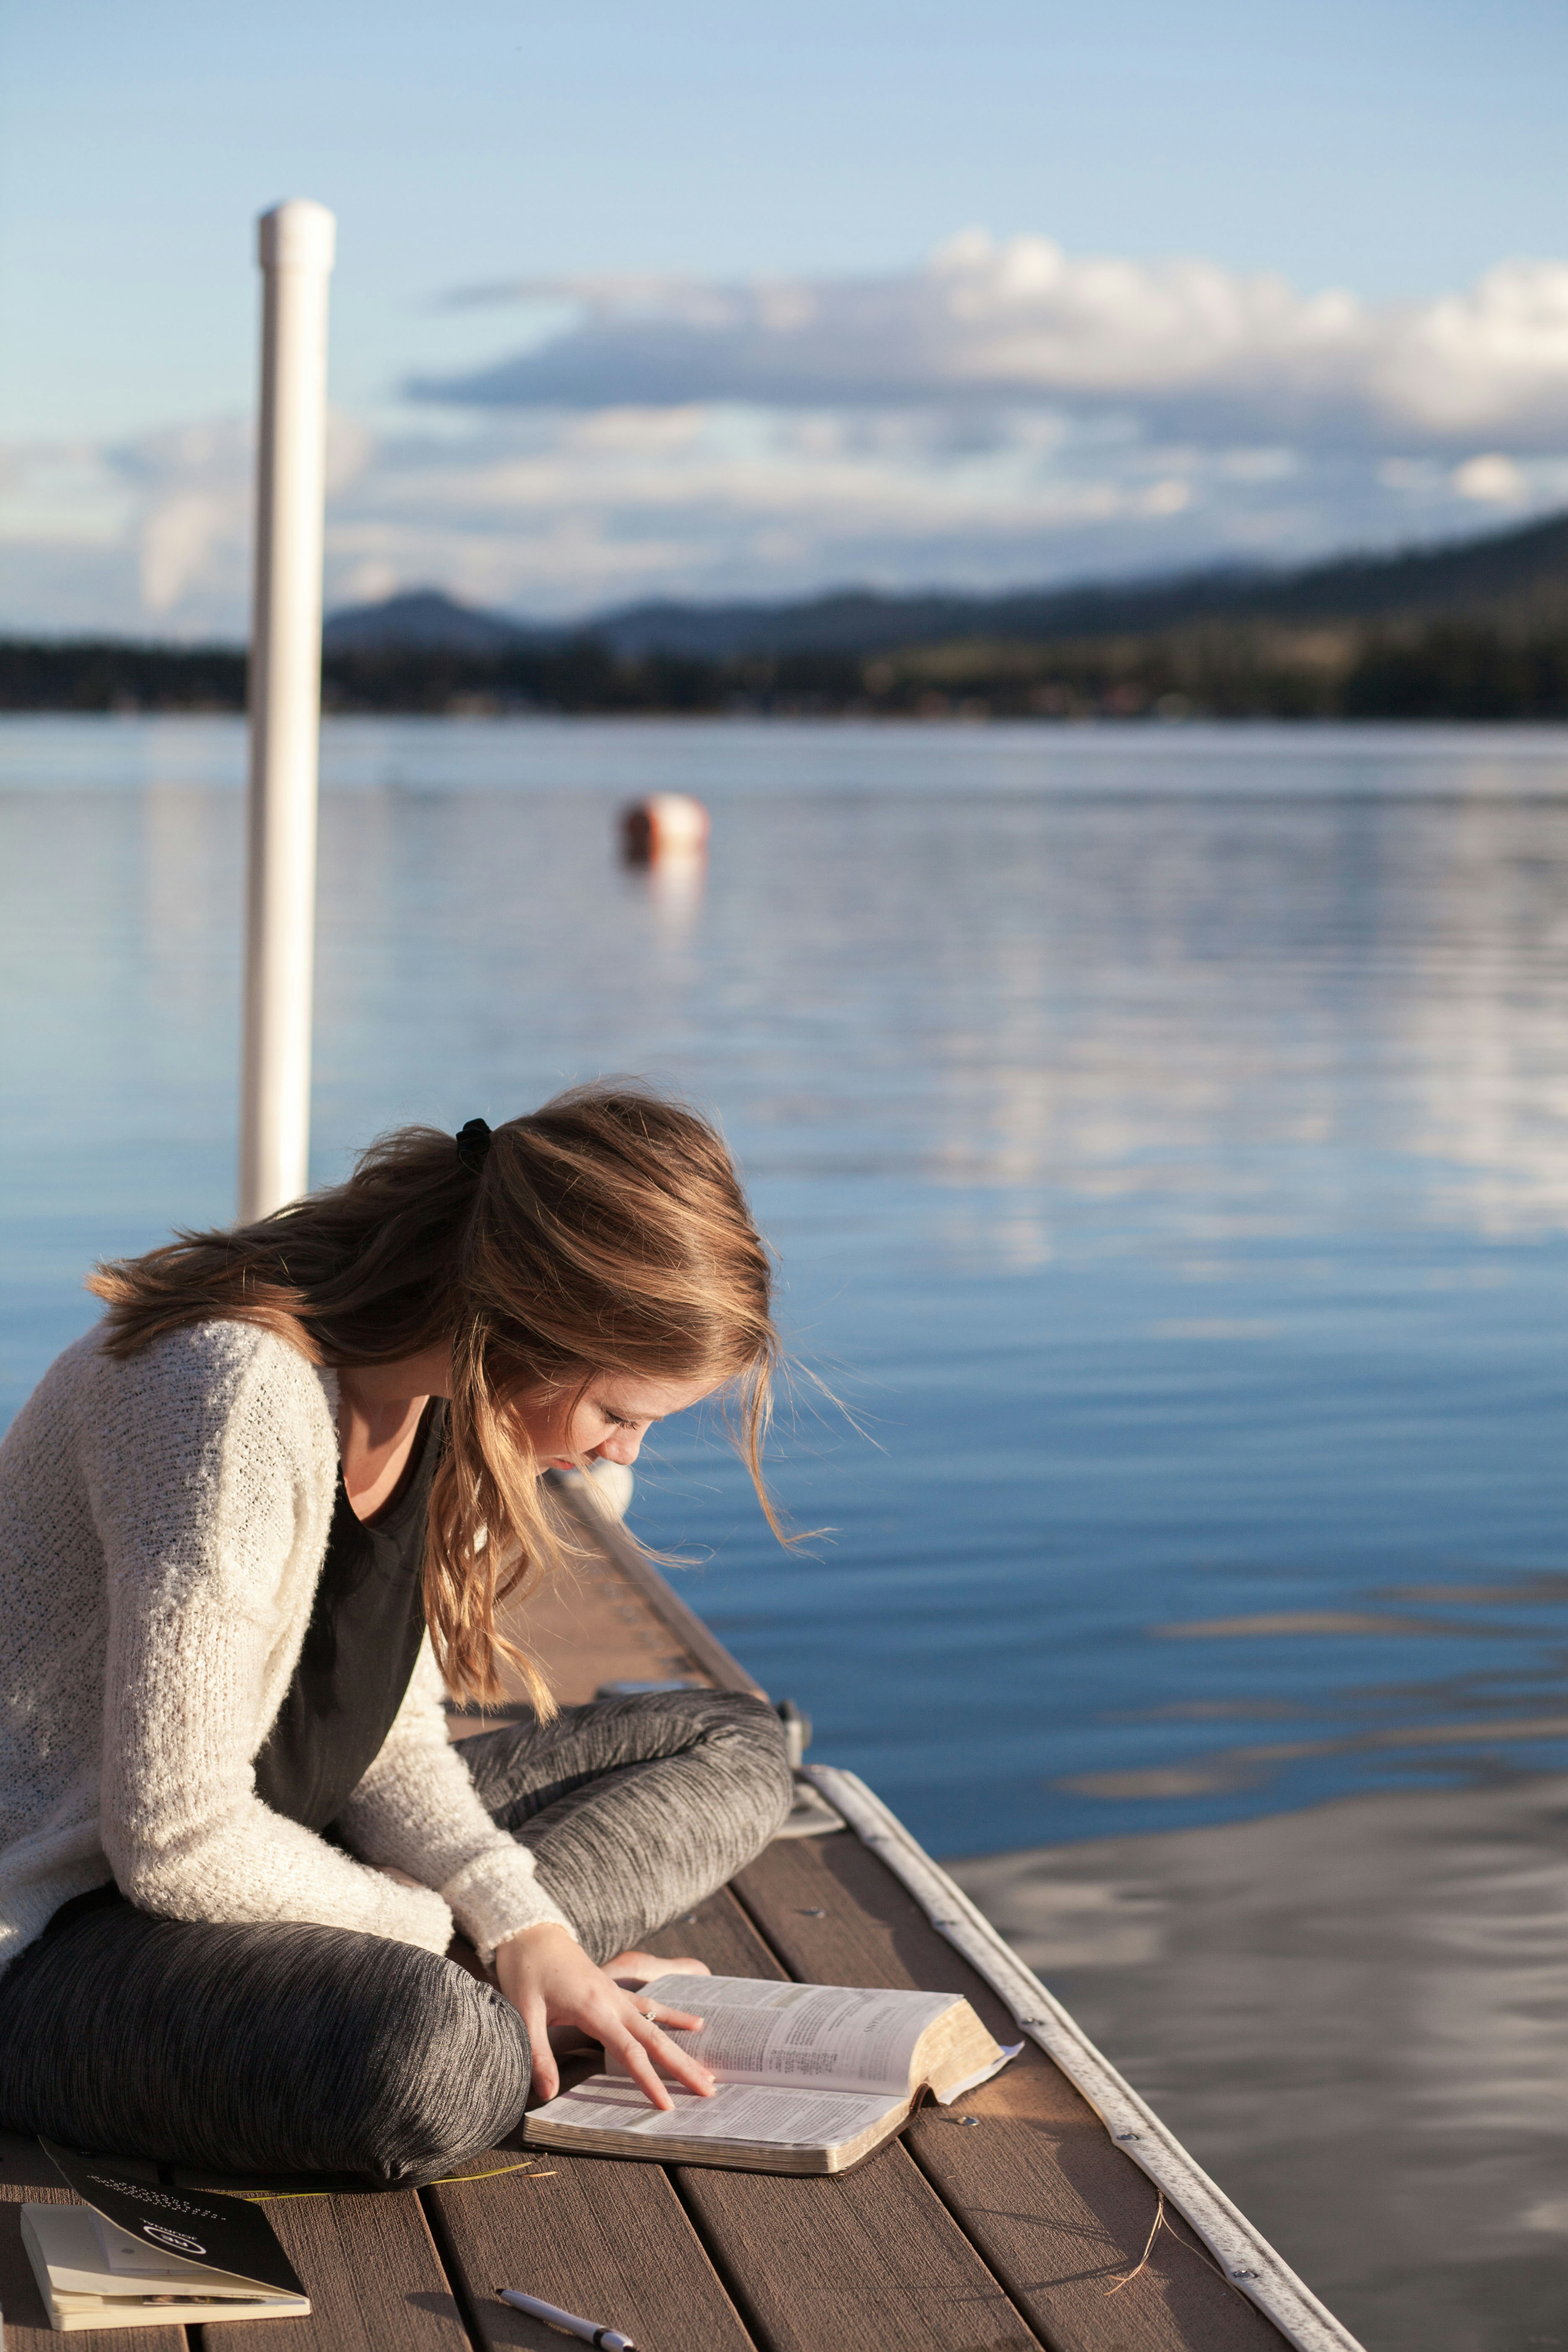 A woman reads a book on a dock.